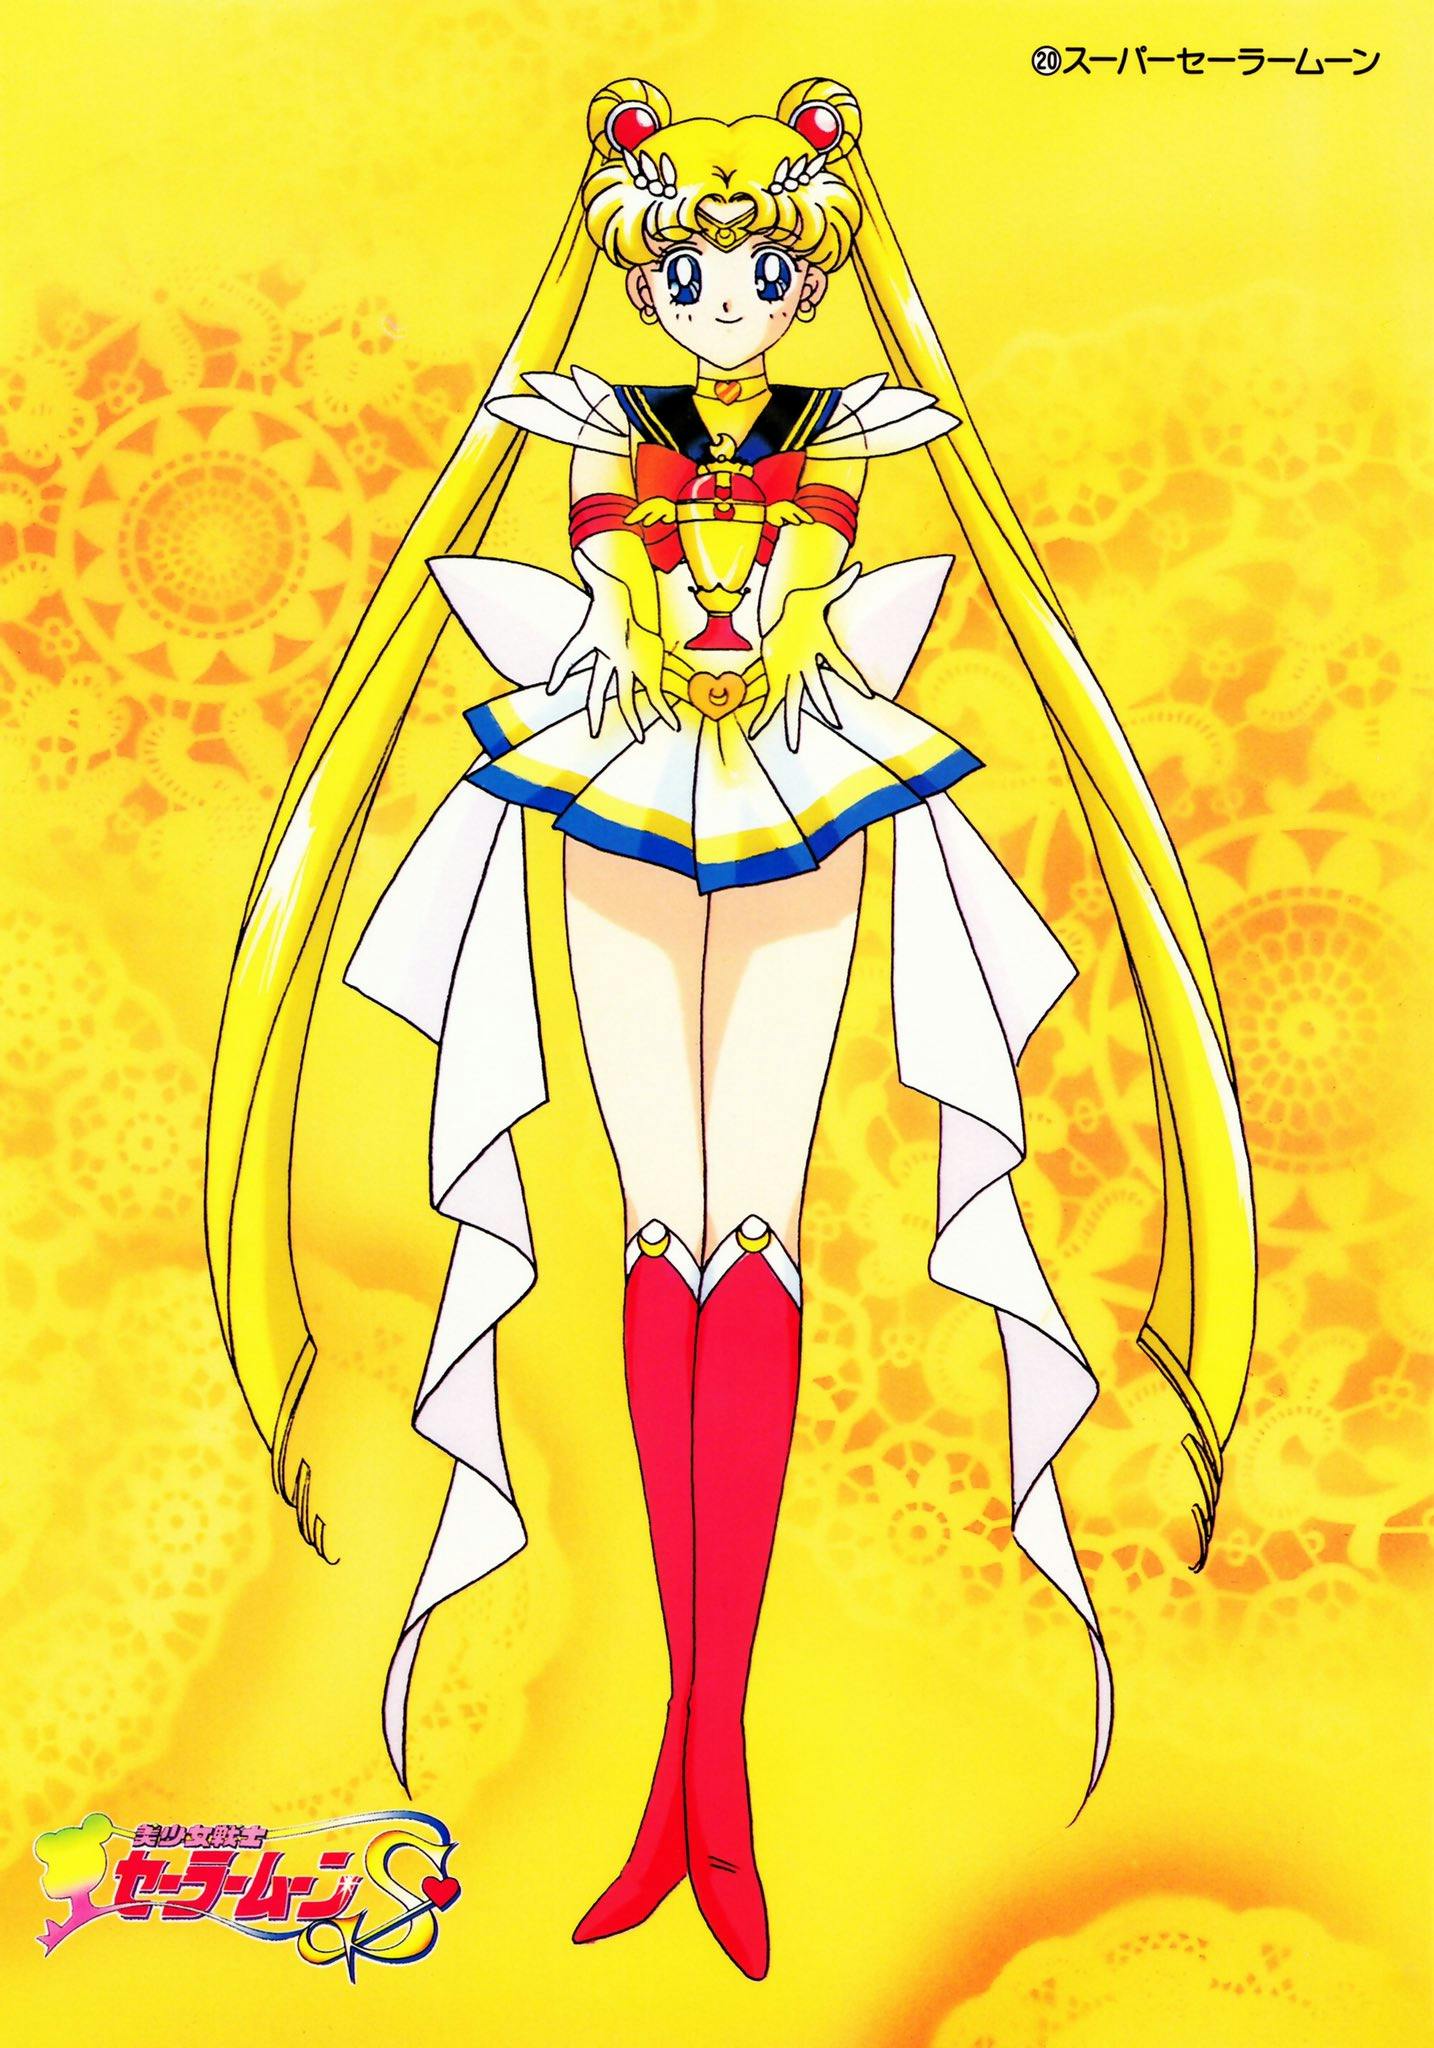 Eternal sailor moon in sailor scout costume holding her hands out